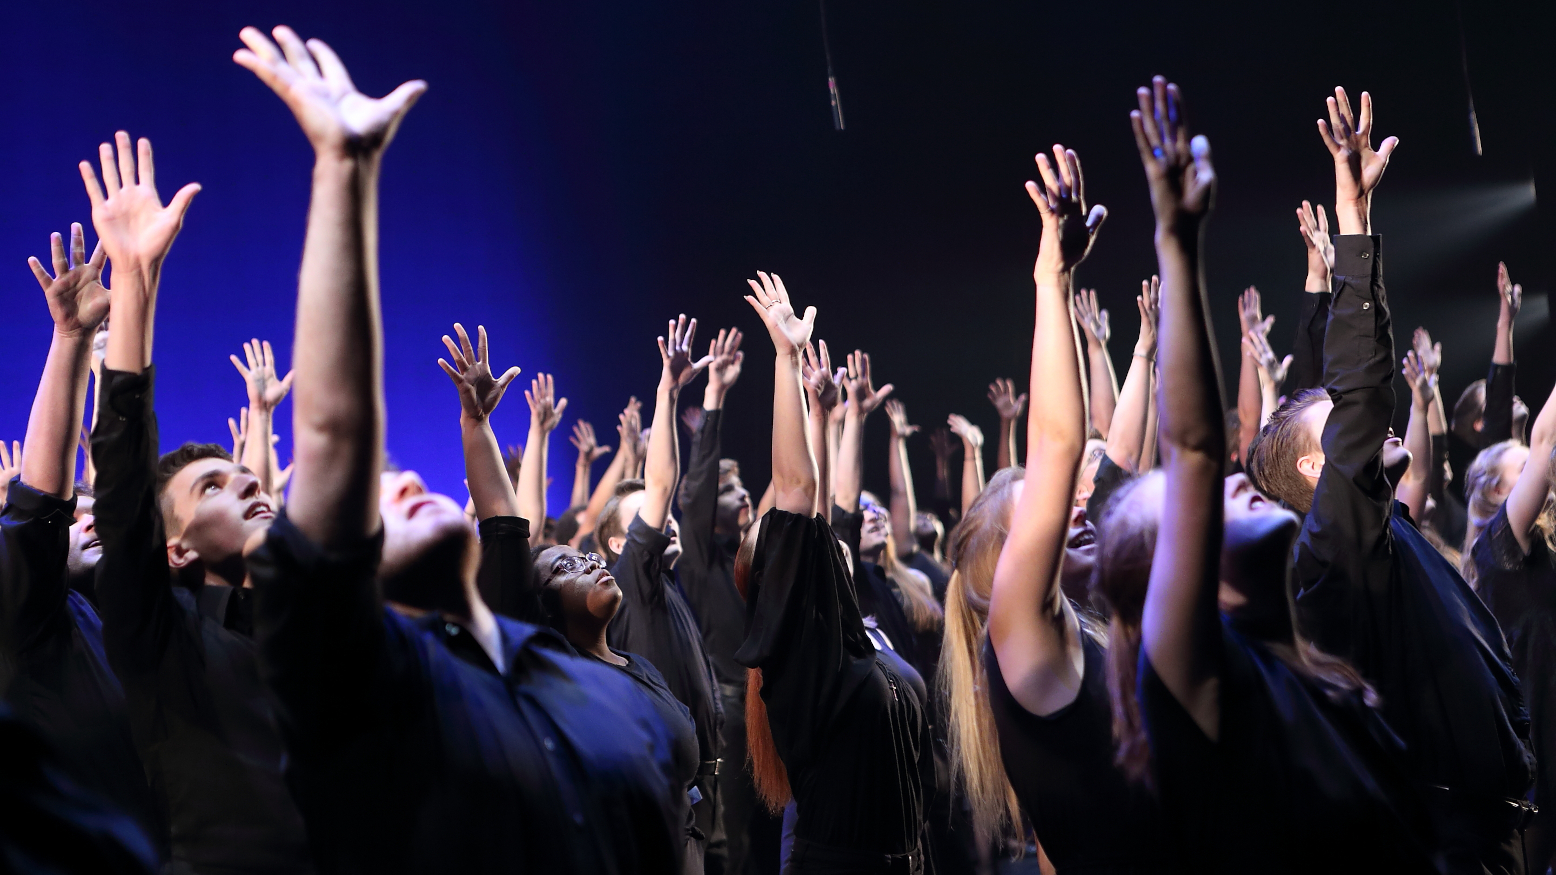 High school students on stage, each one with one arm raised in the air and looking toward the ceiling.